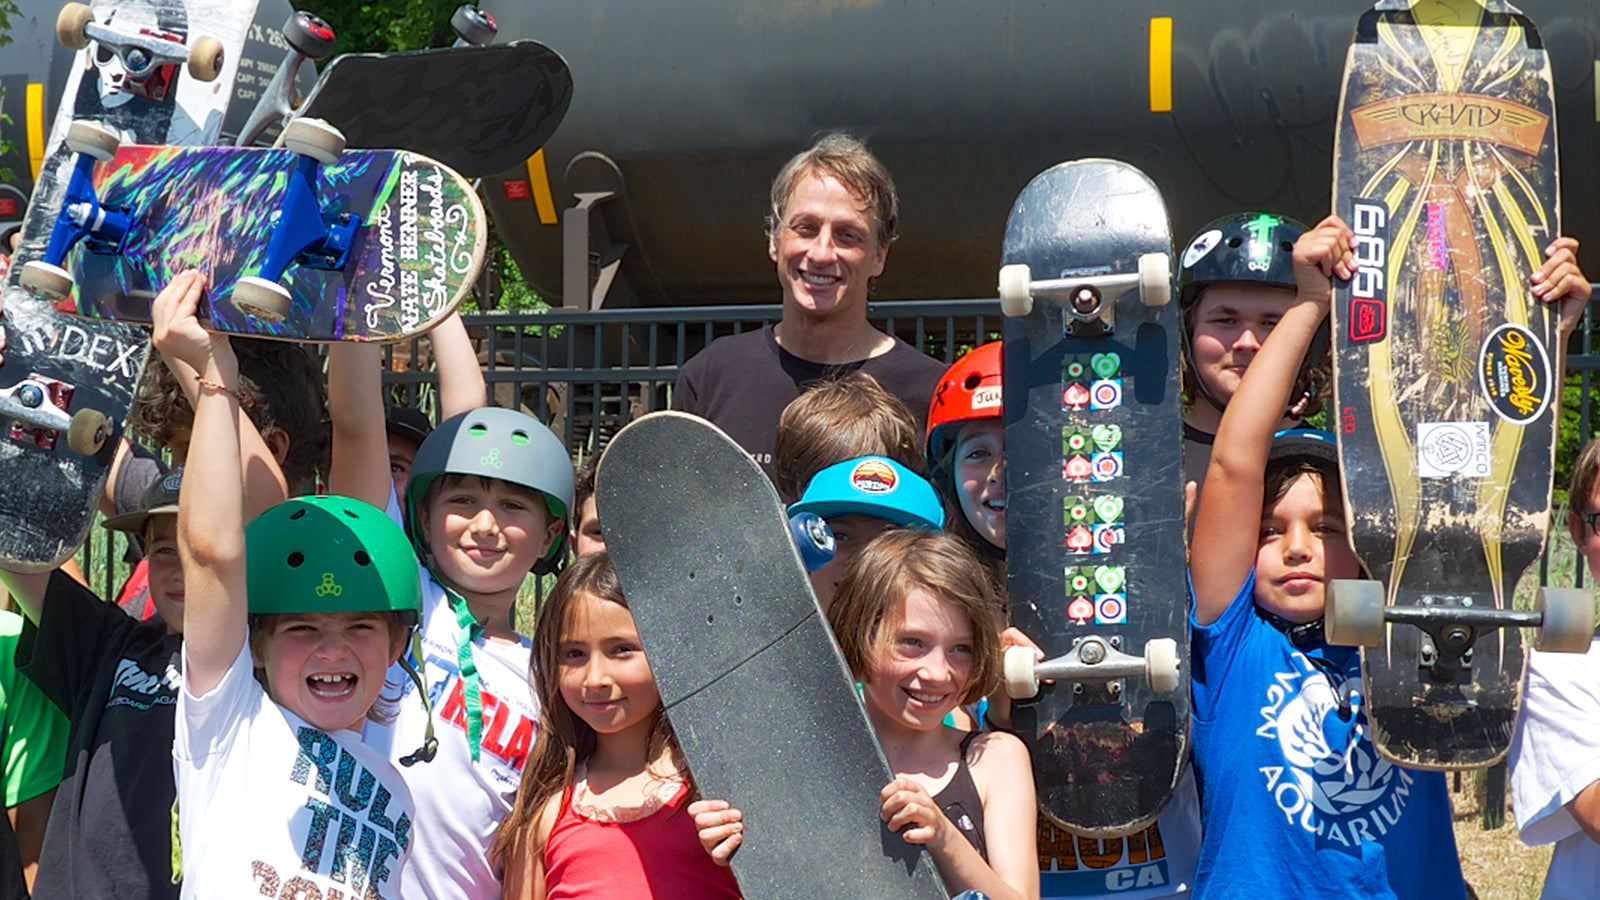 Tony Hawk is posing with a children and their skateboards.